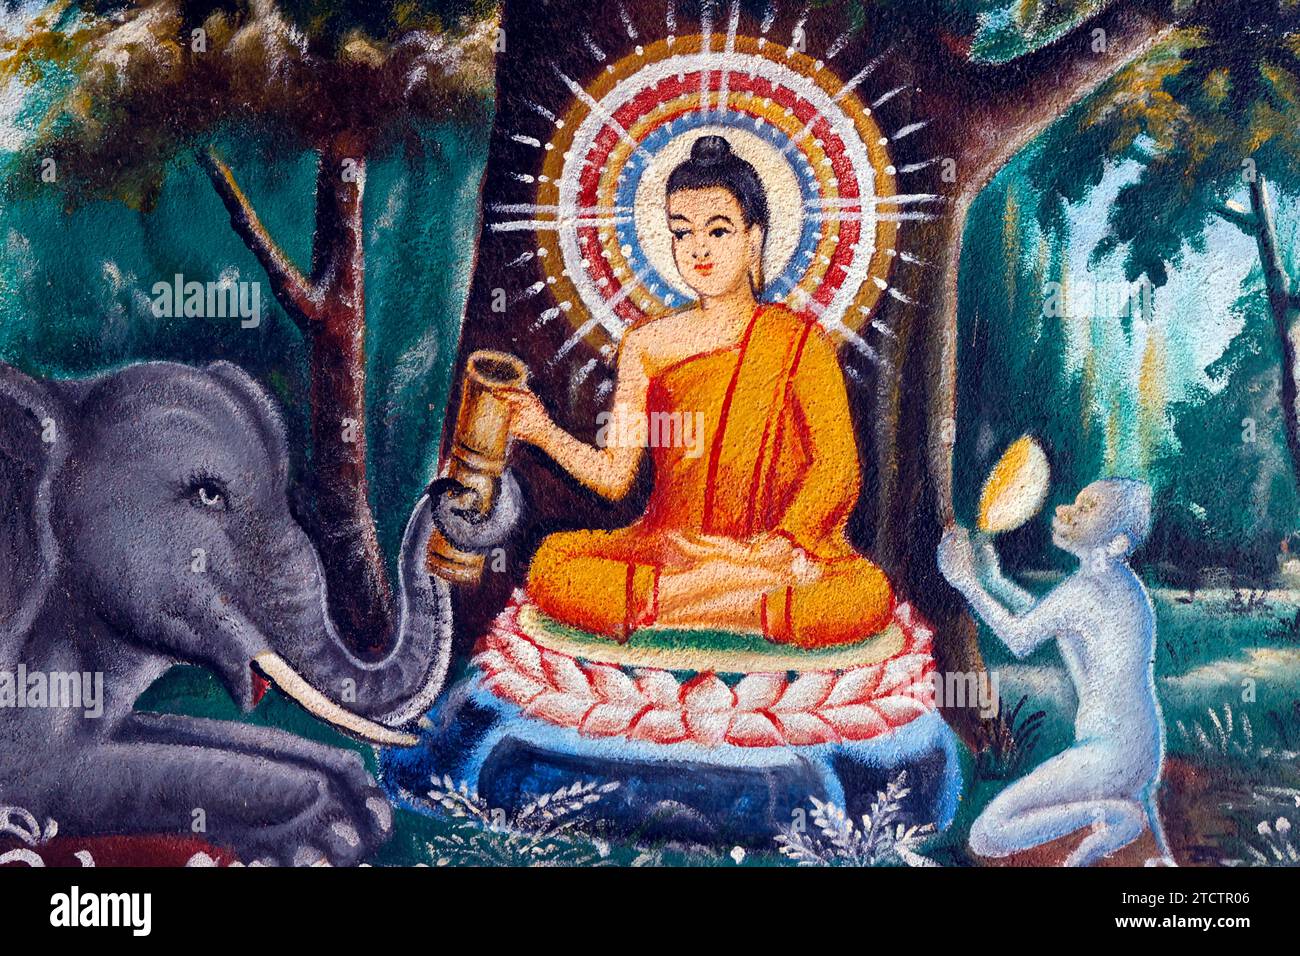 Mongkol Serei Kien Khleang Pagoda.  Life of Siddhartha Gautama, the Buddha.  The Buddha in retreat  attended by disciples and a monkey and elephant wi Stock Photo